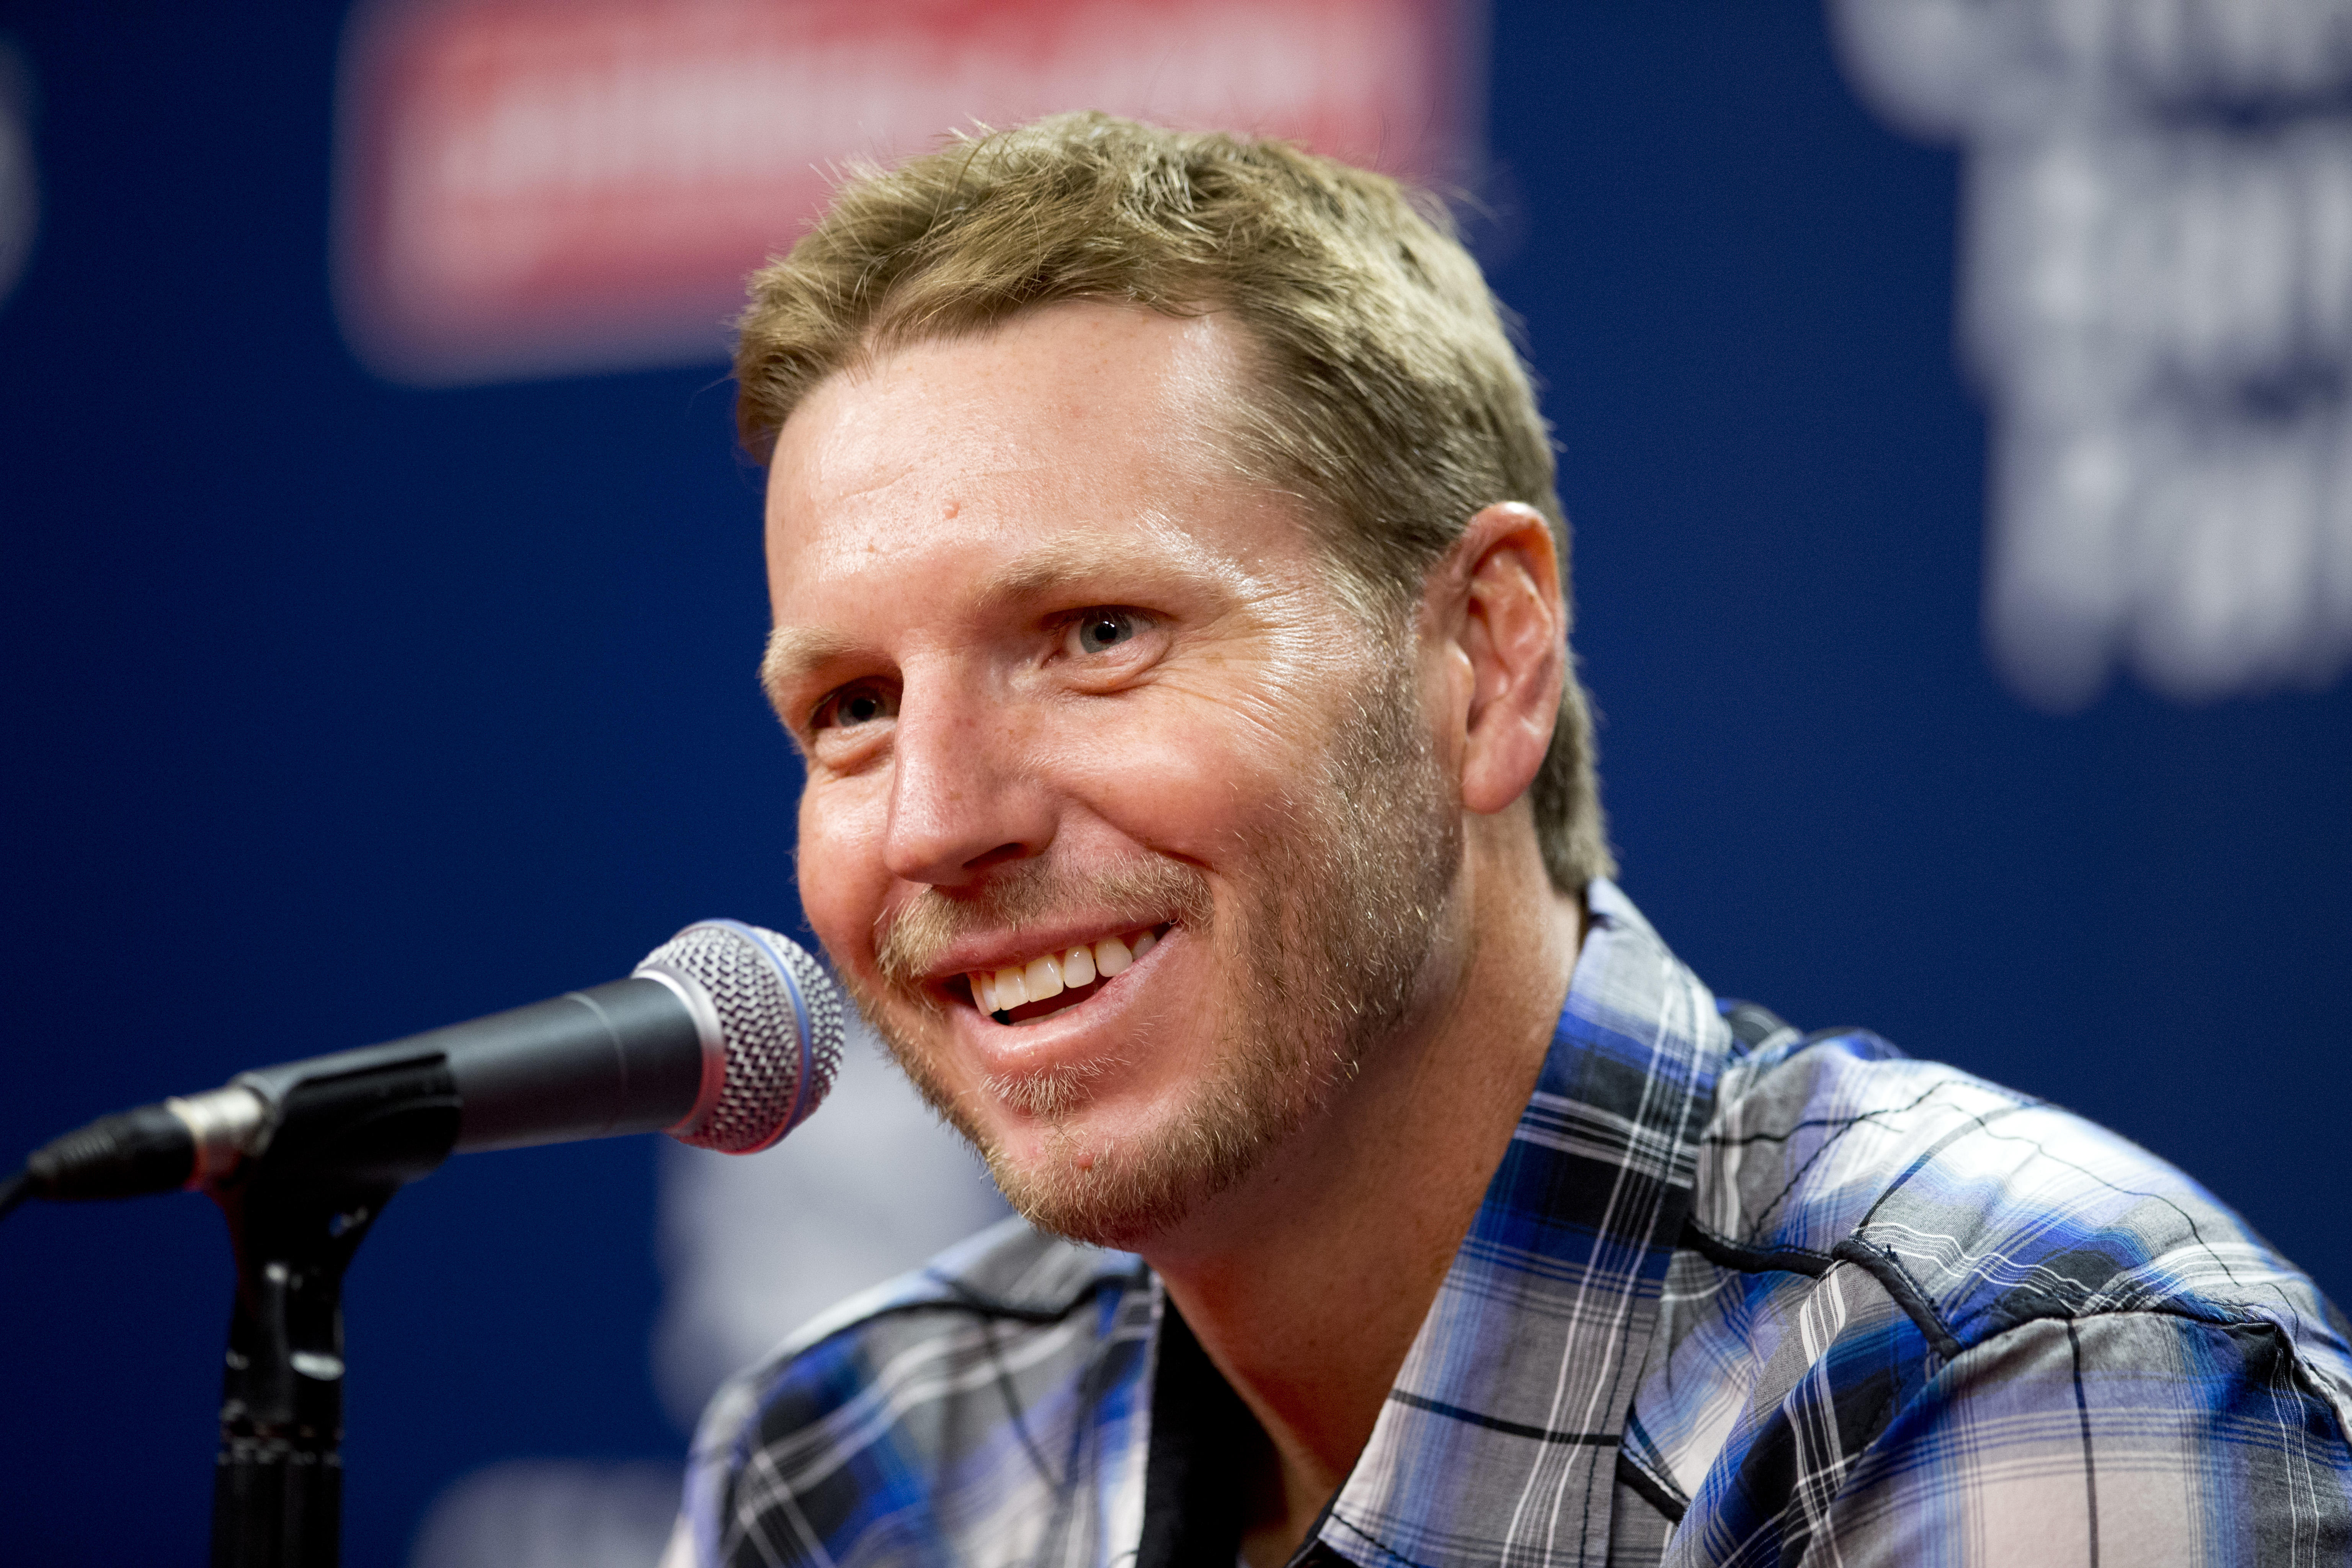 ESPN's 'Imperfect: The Roy Halladay Story' covers the late pitcher's  struggles and his untimely death - Sports Broadcast Journal